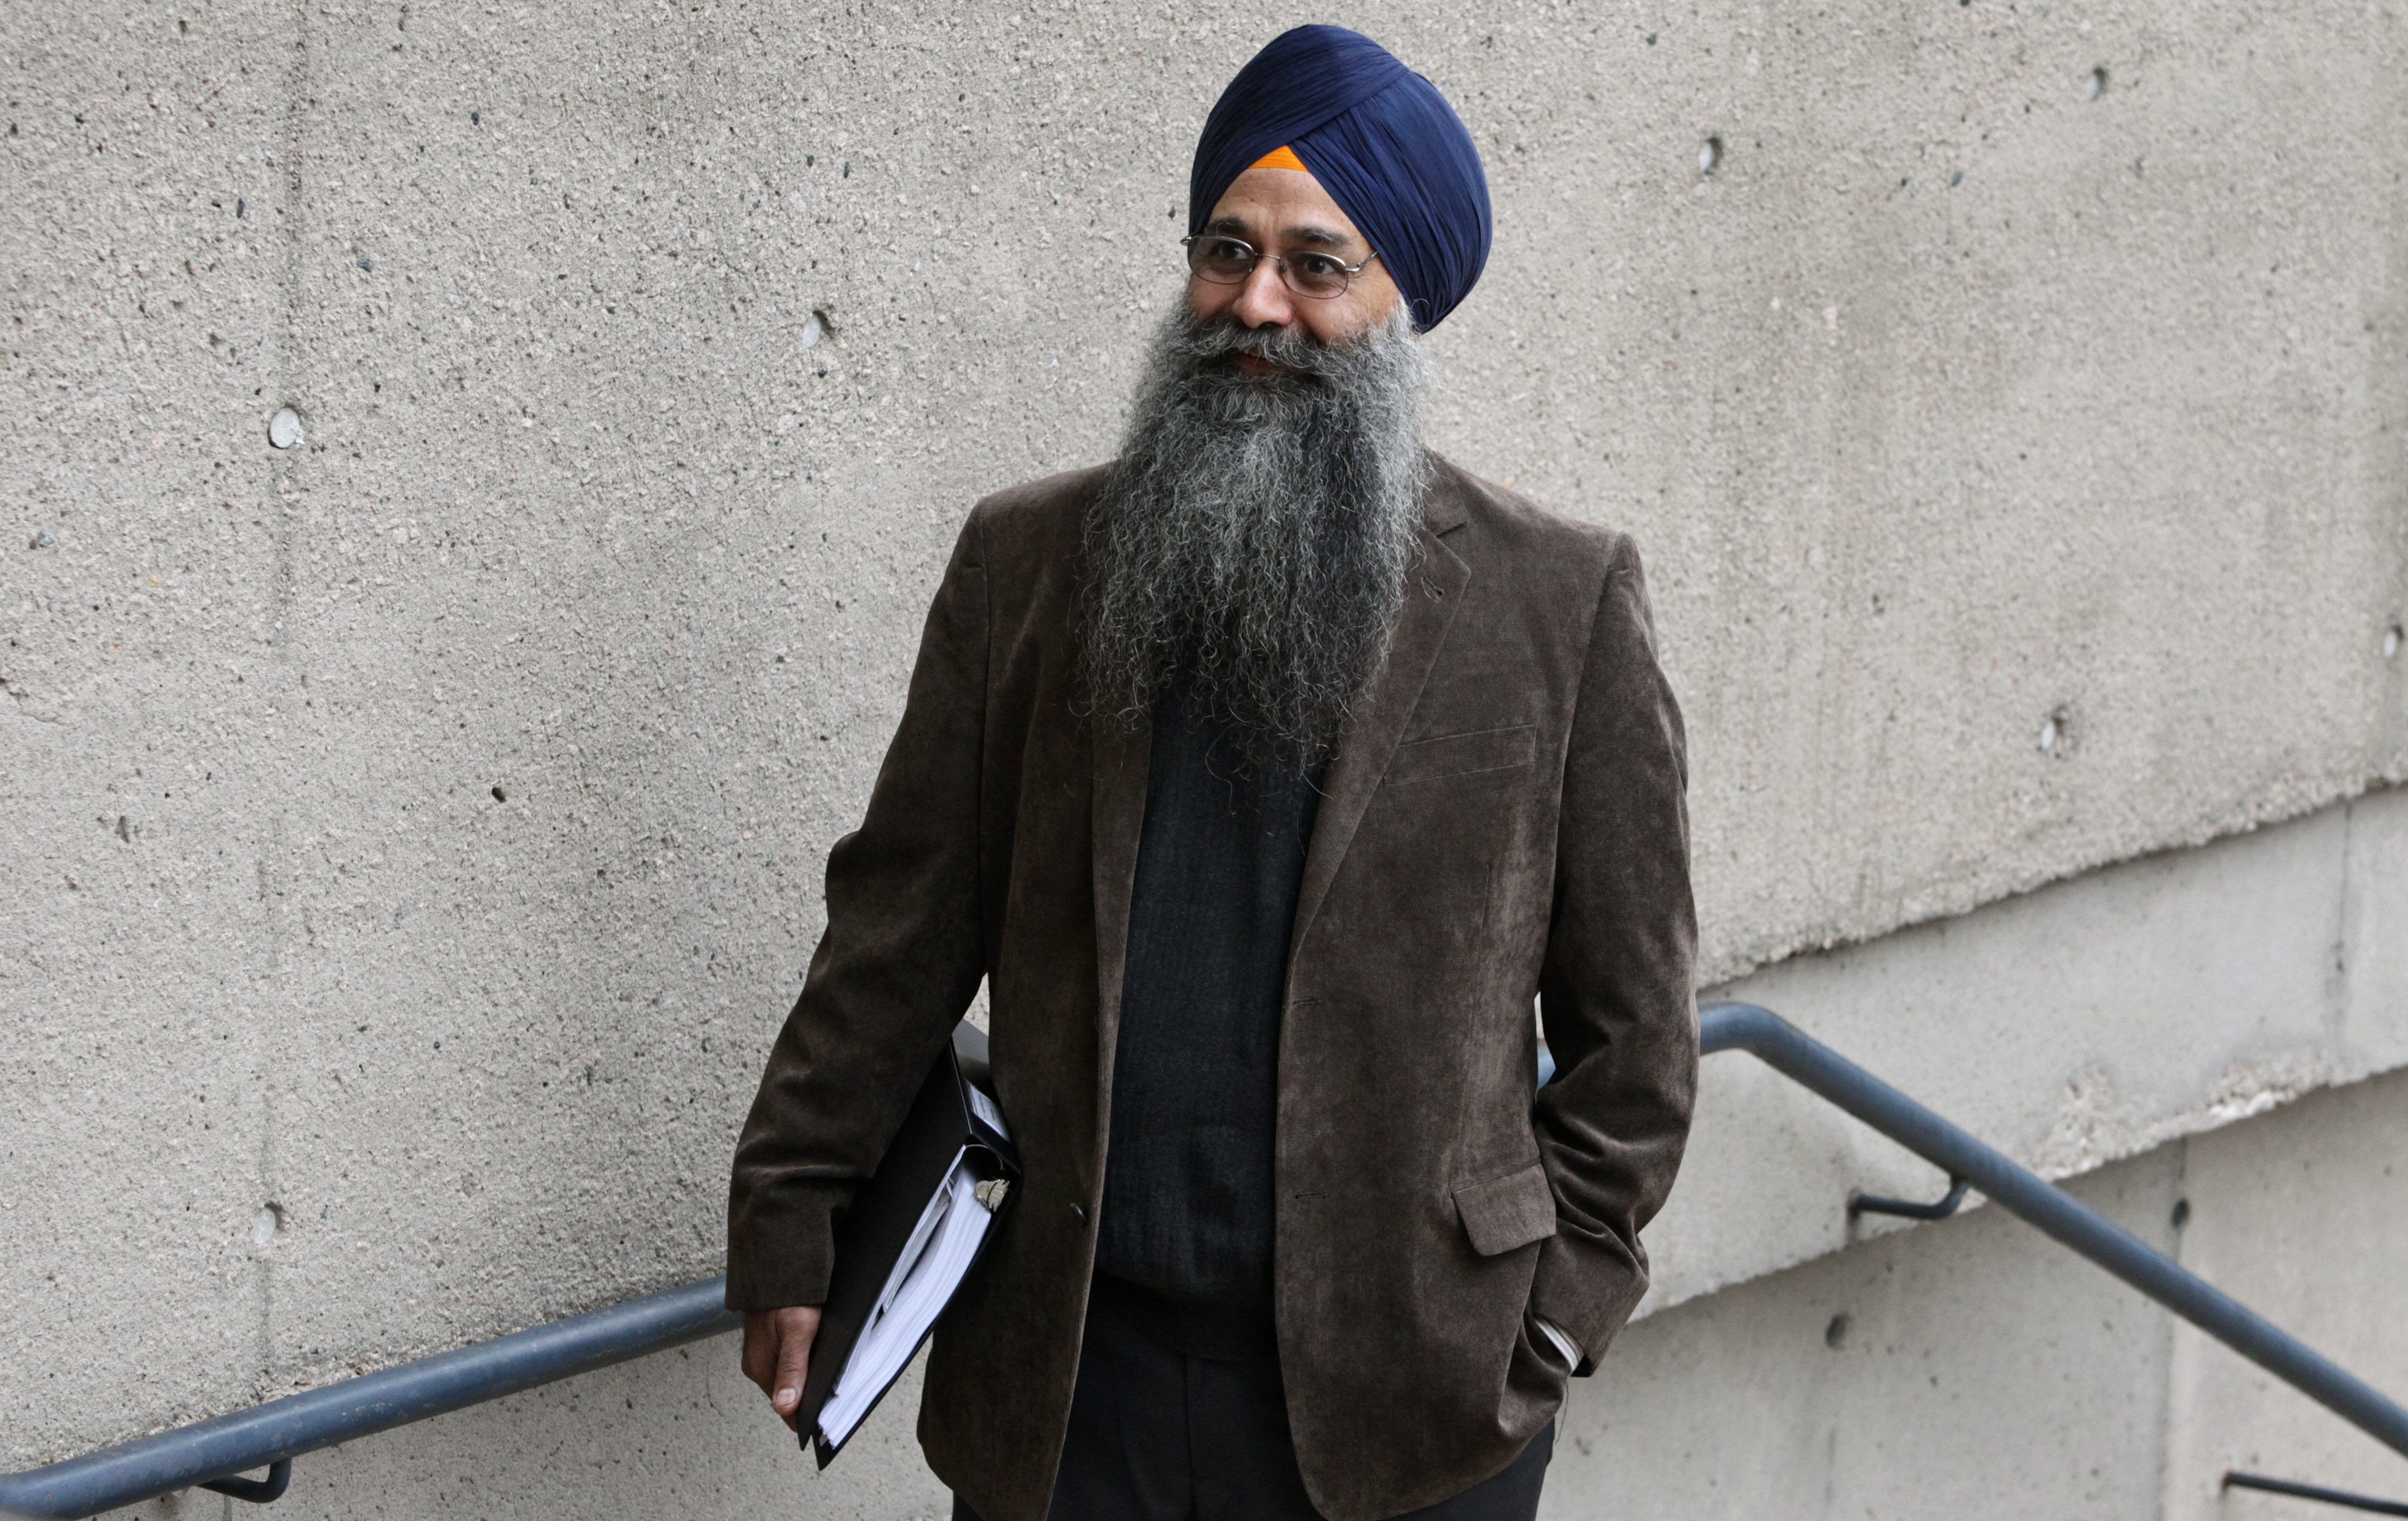 Inderjit Singh Reyat, the only person convicted for the 1985 bombing of Air India Flight 182. (Darryl Dyck—AP)